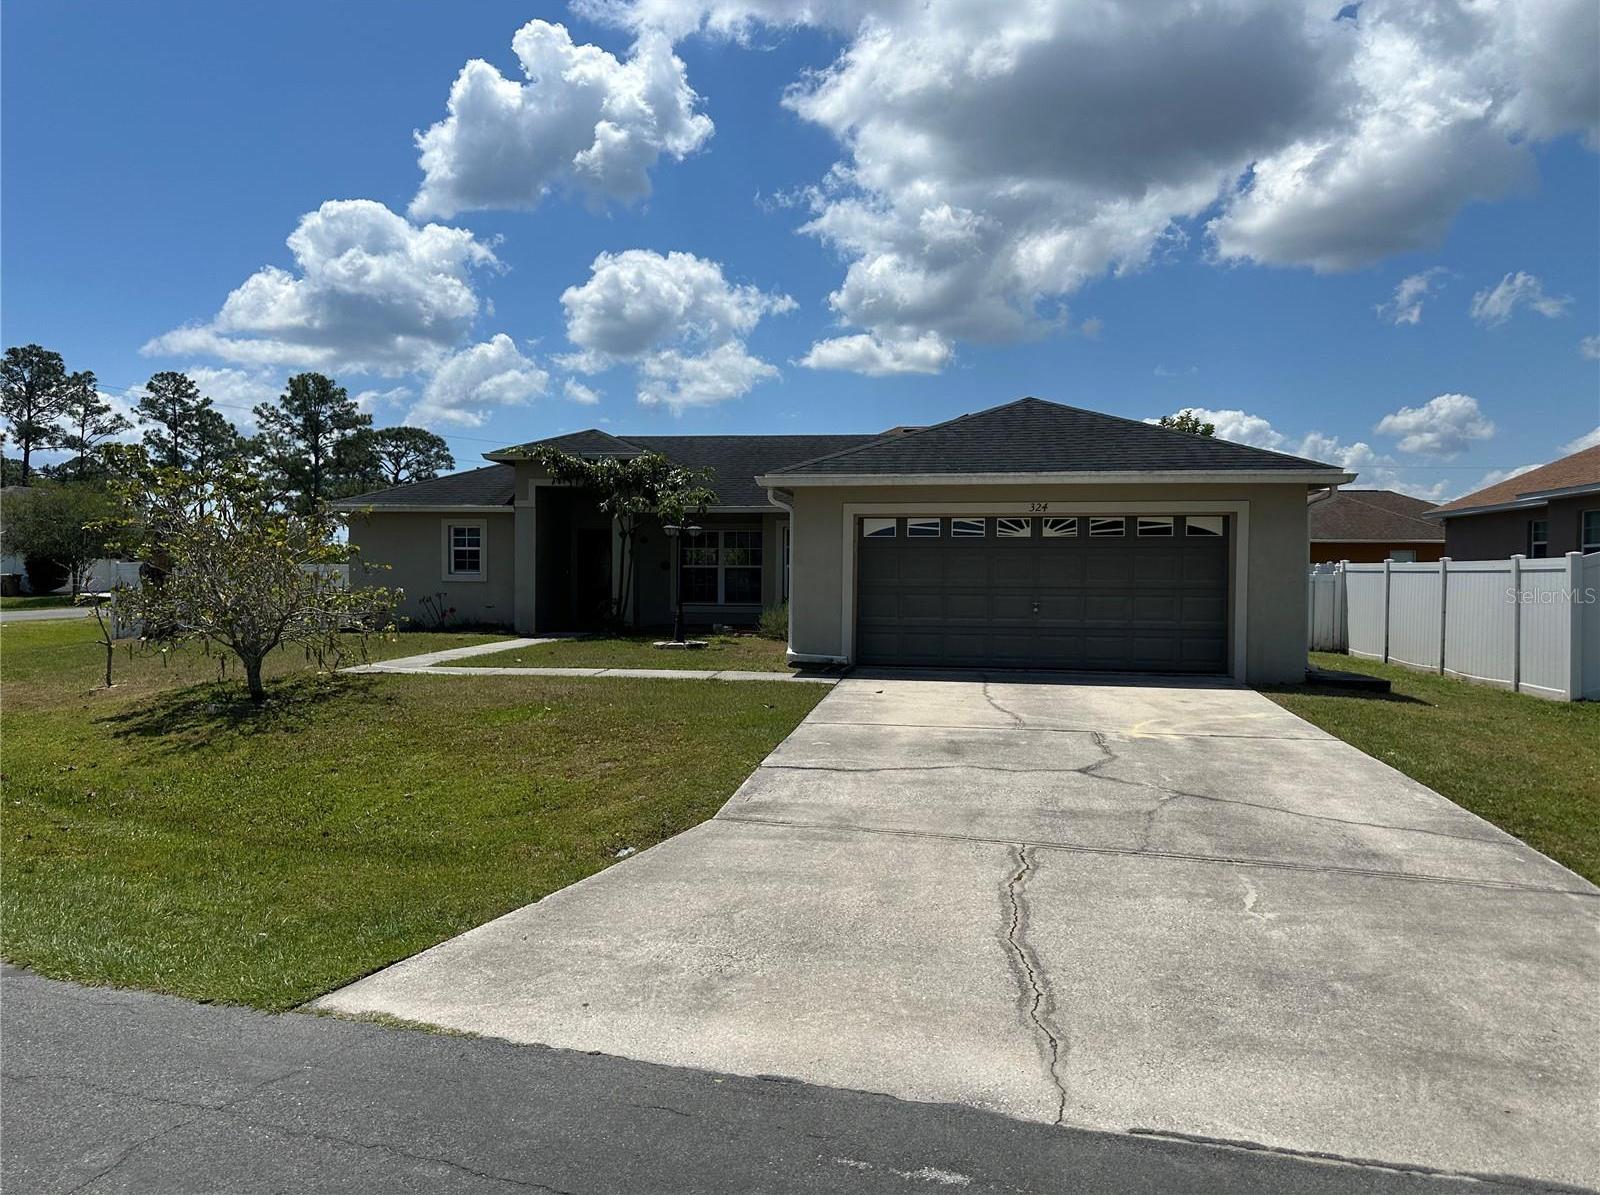 Photo one of 324 Corsica Ct Kissimmee FL 34758 | MLS O6199765